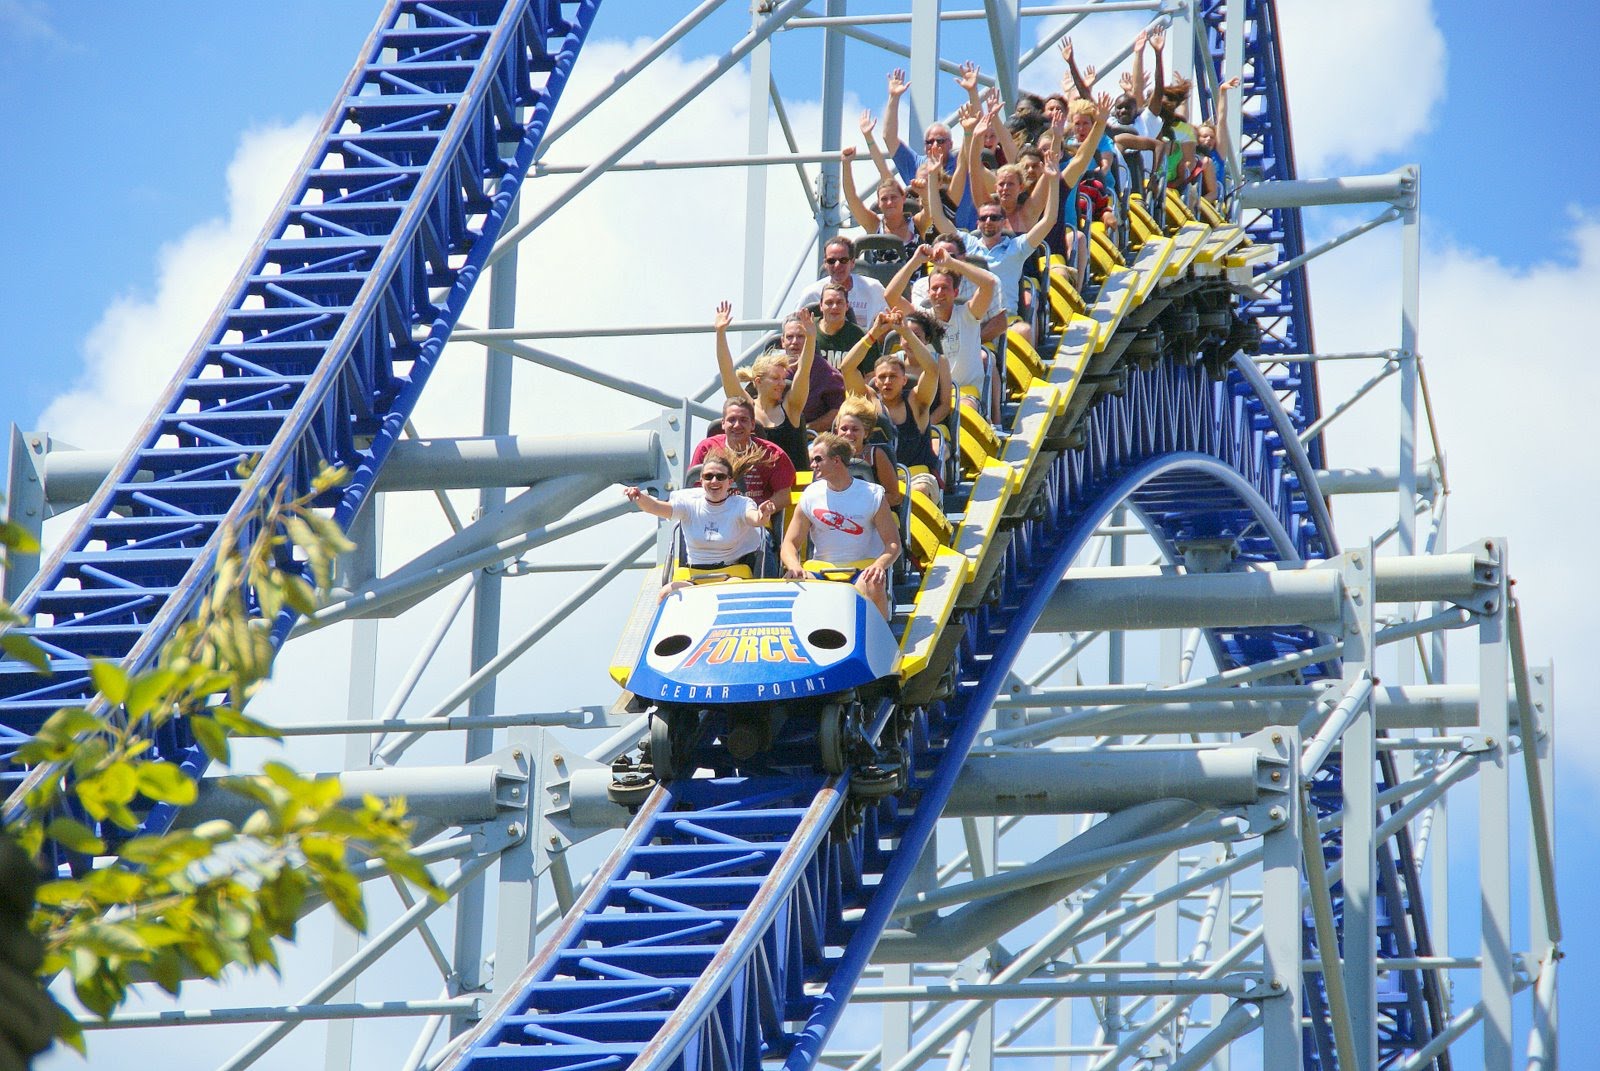 The Top 10 Fastest Roller Coasters In The World Add to Bucketlist